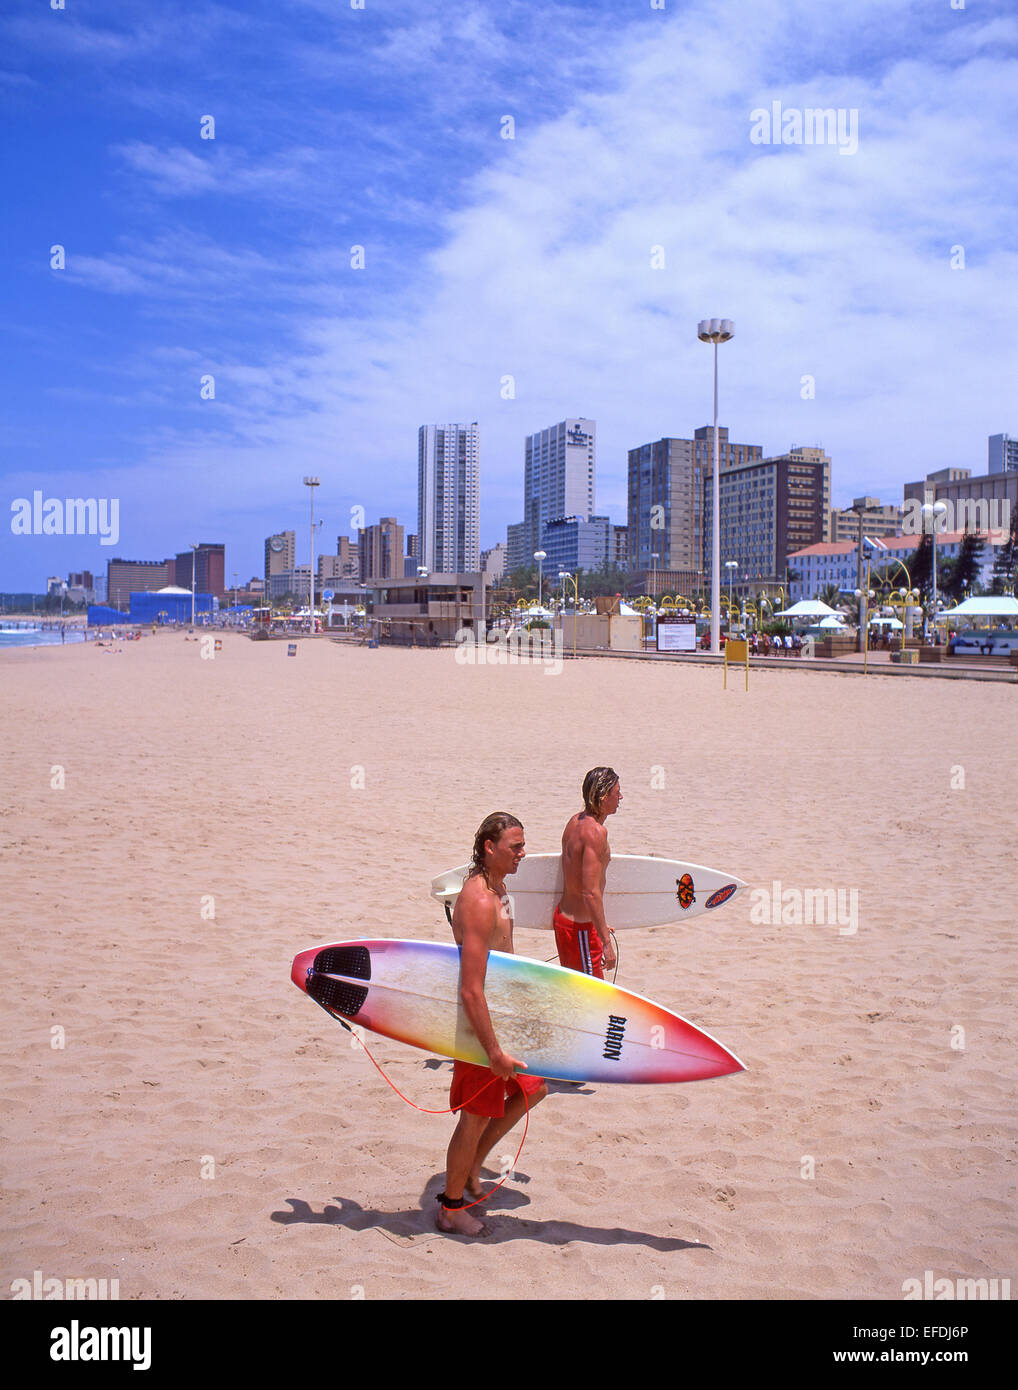 Surfers on 'The Golden Mile' beachfront, Durban, KwaZulu-Natal province, South Africa Stock Photo